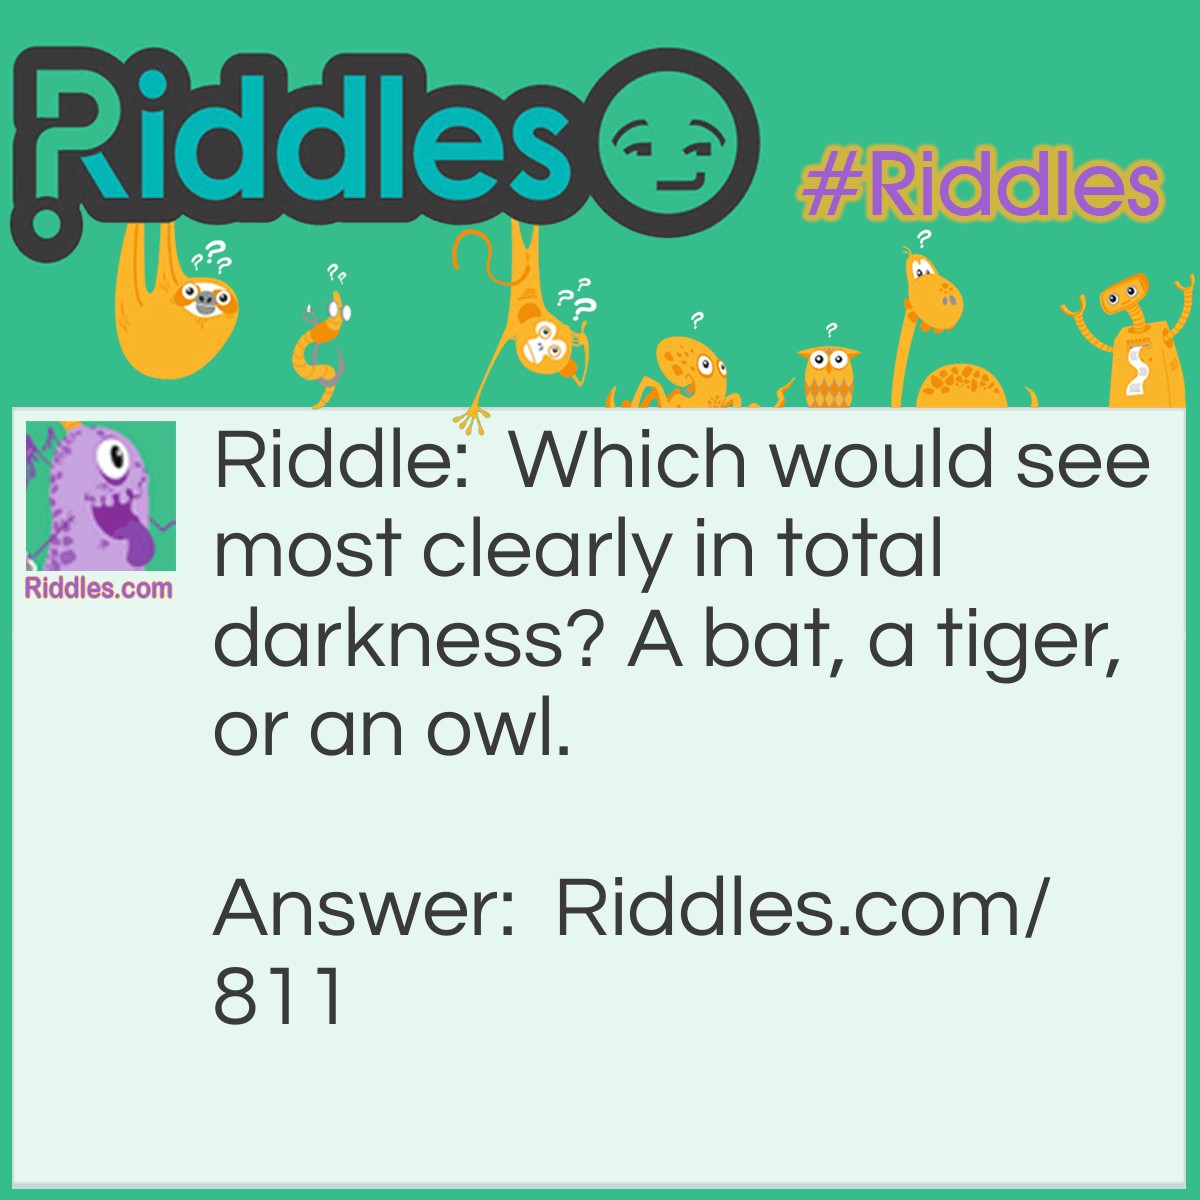 Riddle: Which would see most clearly in total darkness? A bat, a tiger, or an owl. Answer: None. In total darkness it is impossible to see anything.